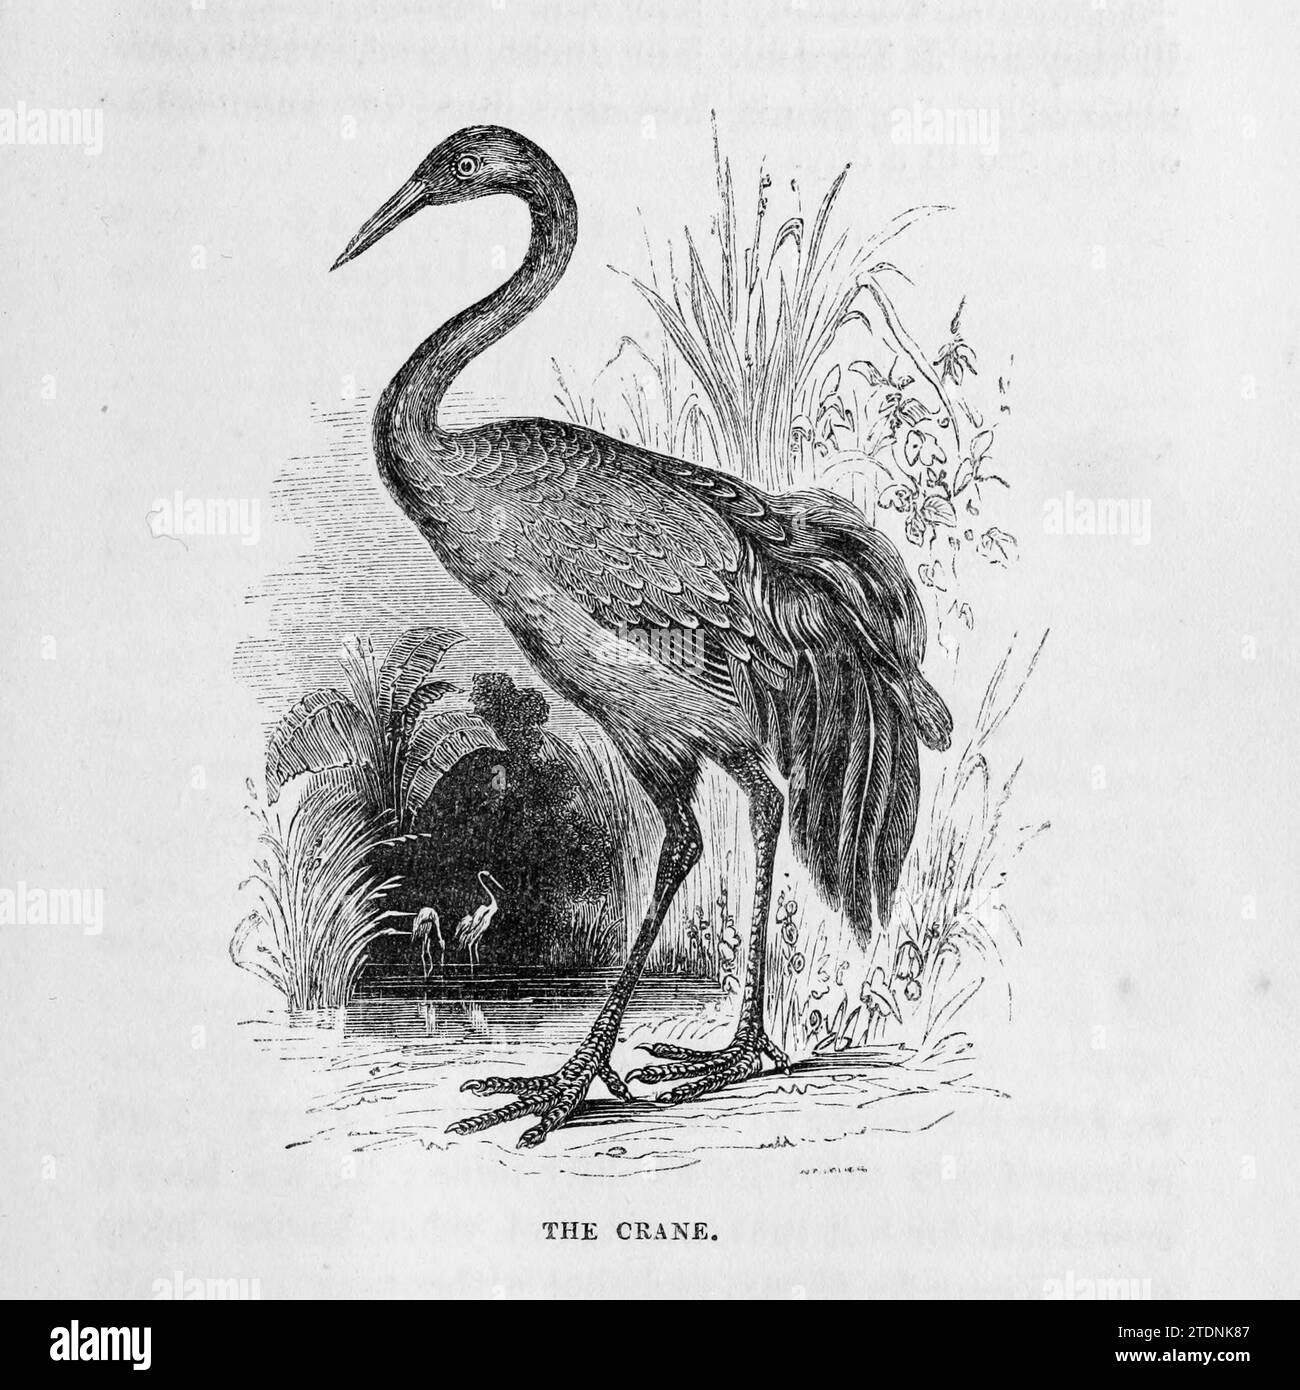 The Crane from the book The Severn valley: a series of sketches, descriptive and pictorial, of the course of the Severn: containing notices of its topographical, industrial, and geological features; with glances at its historical and legendary associations by Randall, John, 1810-1910 Publication date 1862 Publisher J. S. Virtue Stock Photo